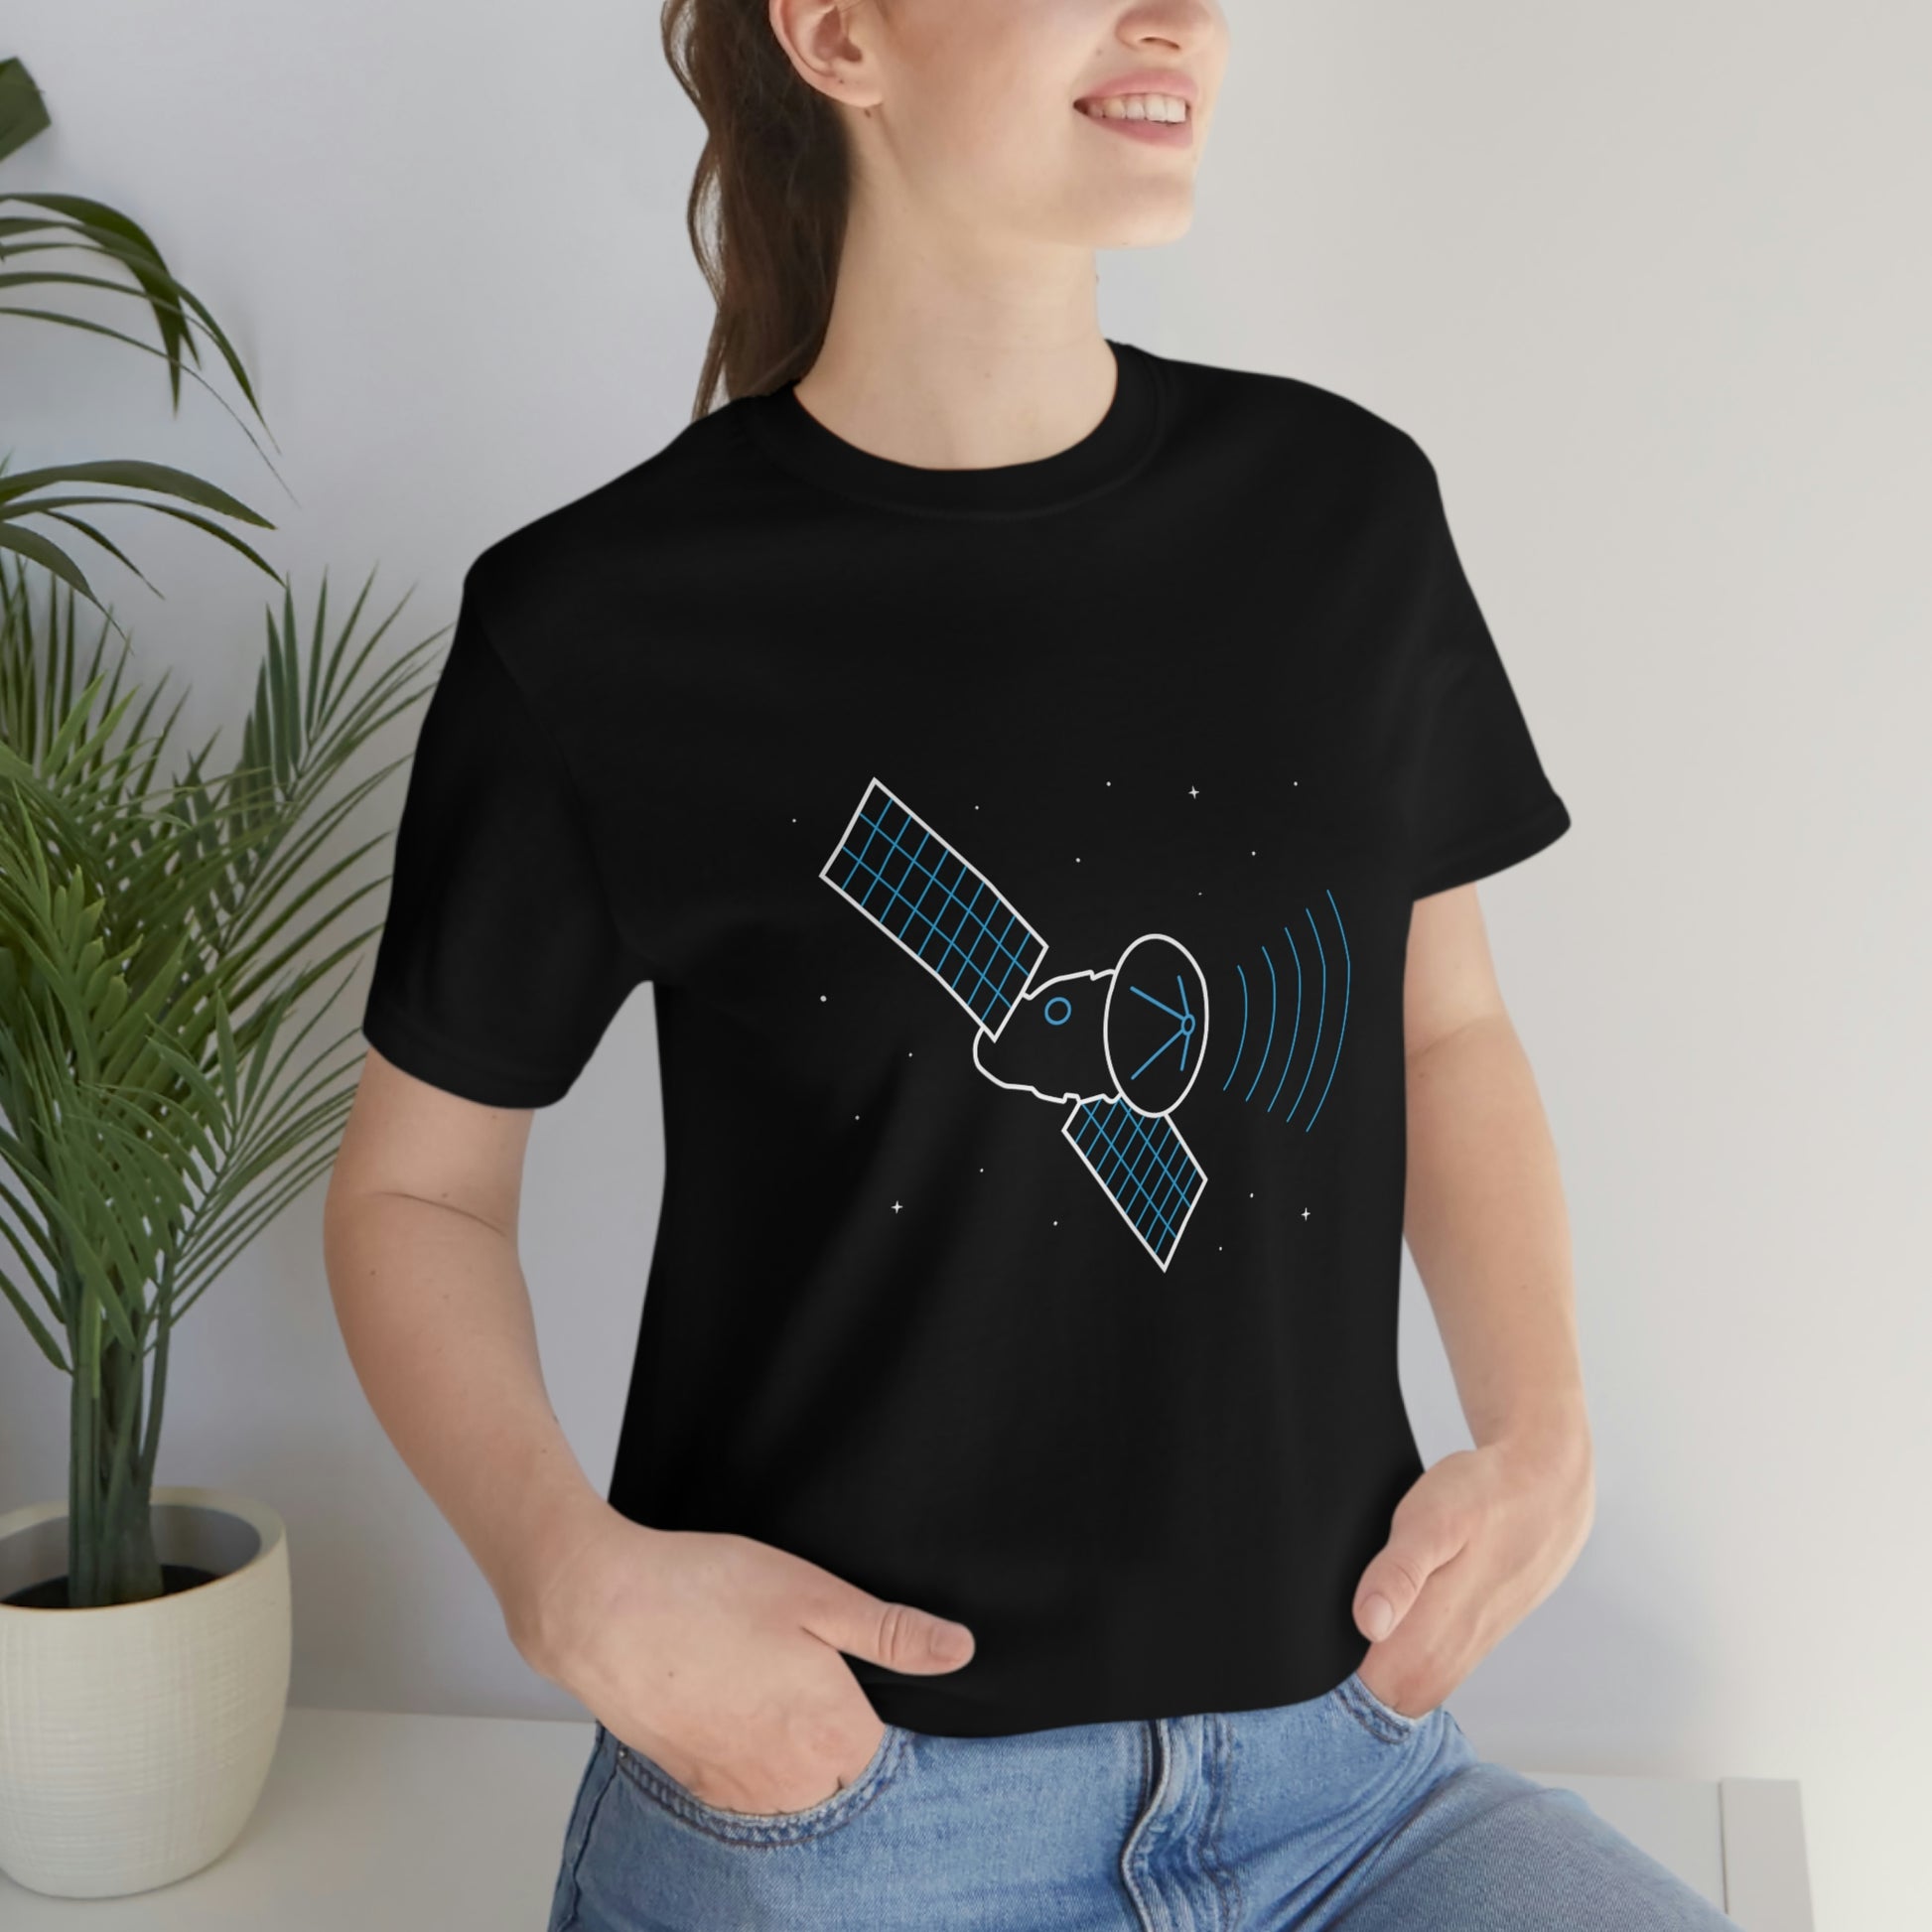 Black T-Shirt featuring a neon transmission satellite space design, from the TEQNEON Spacecraft collection